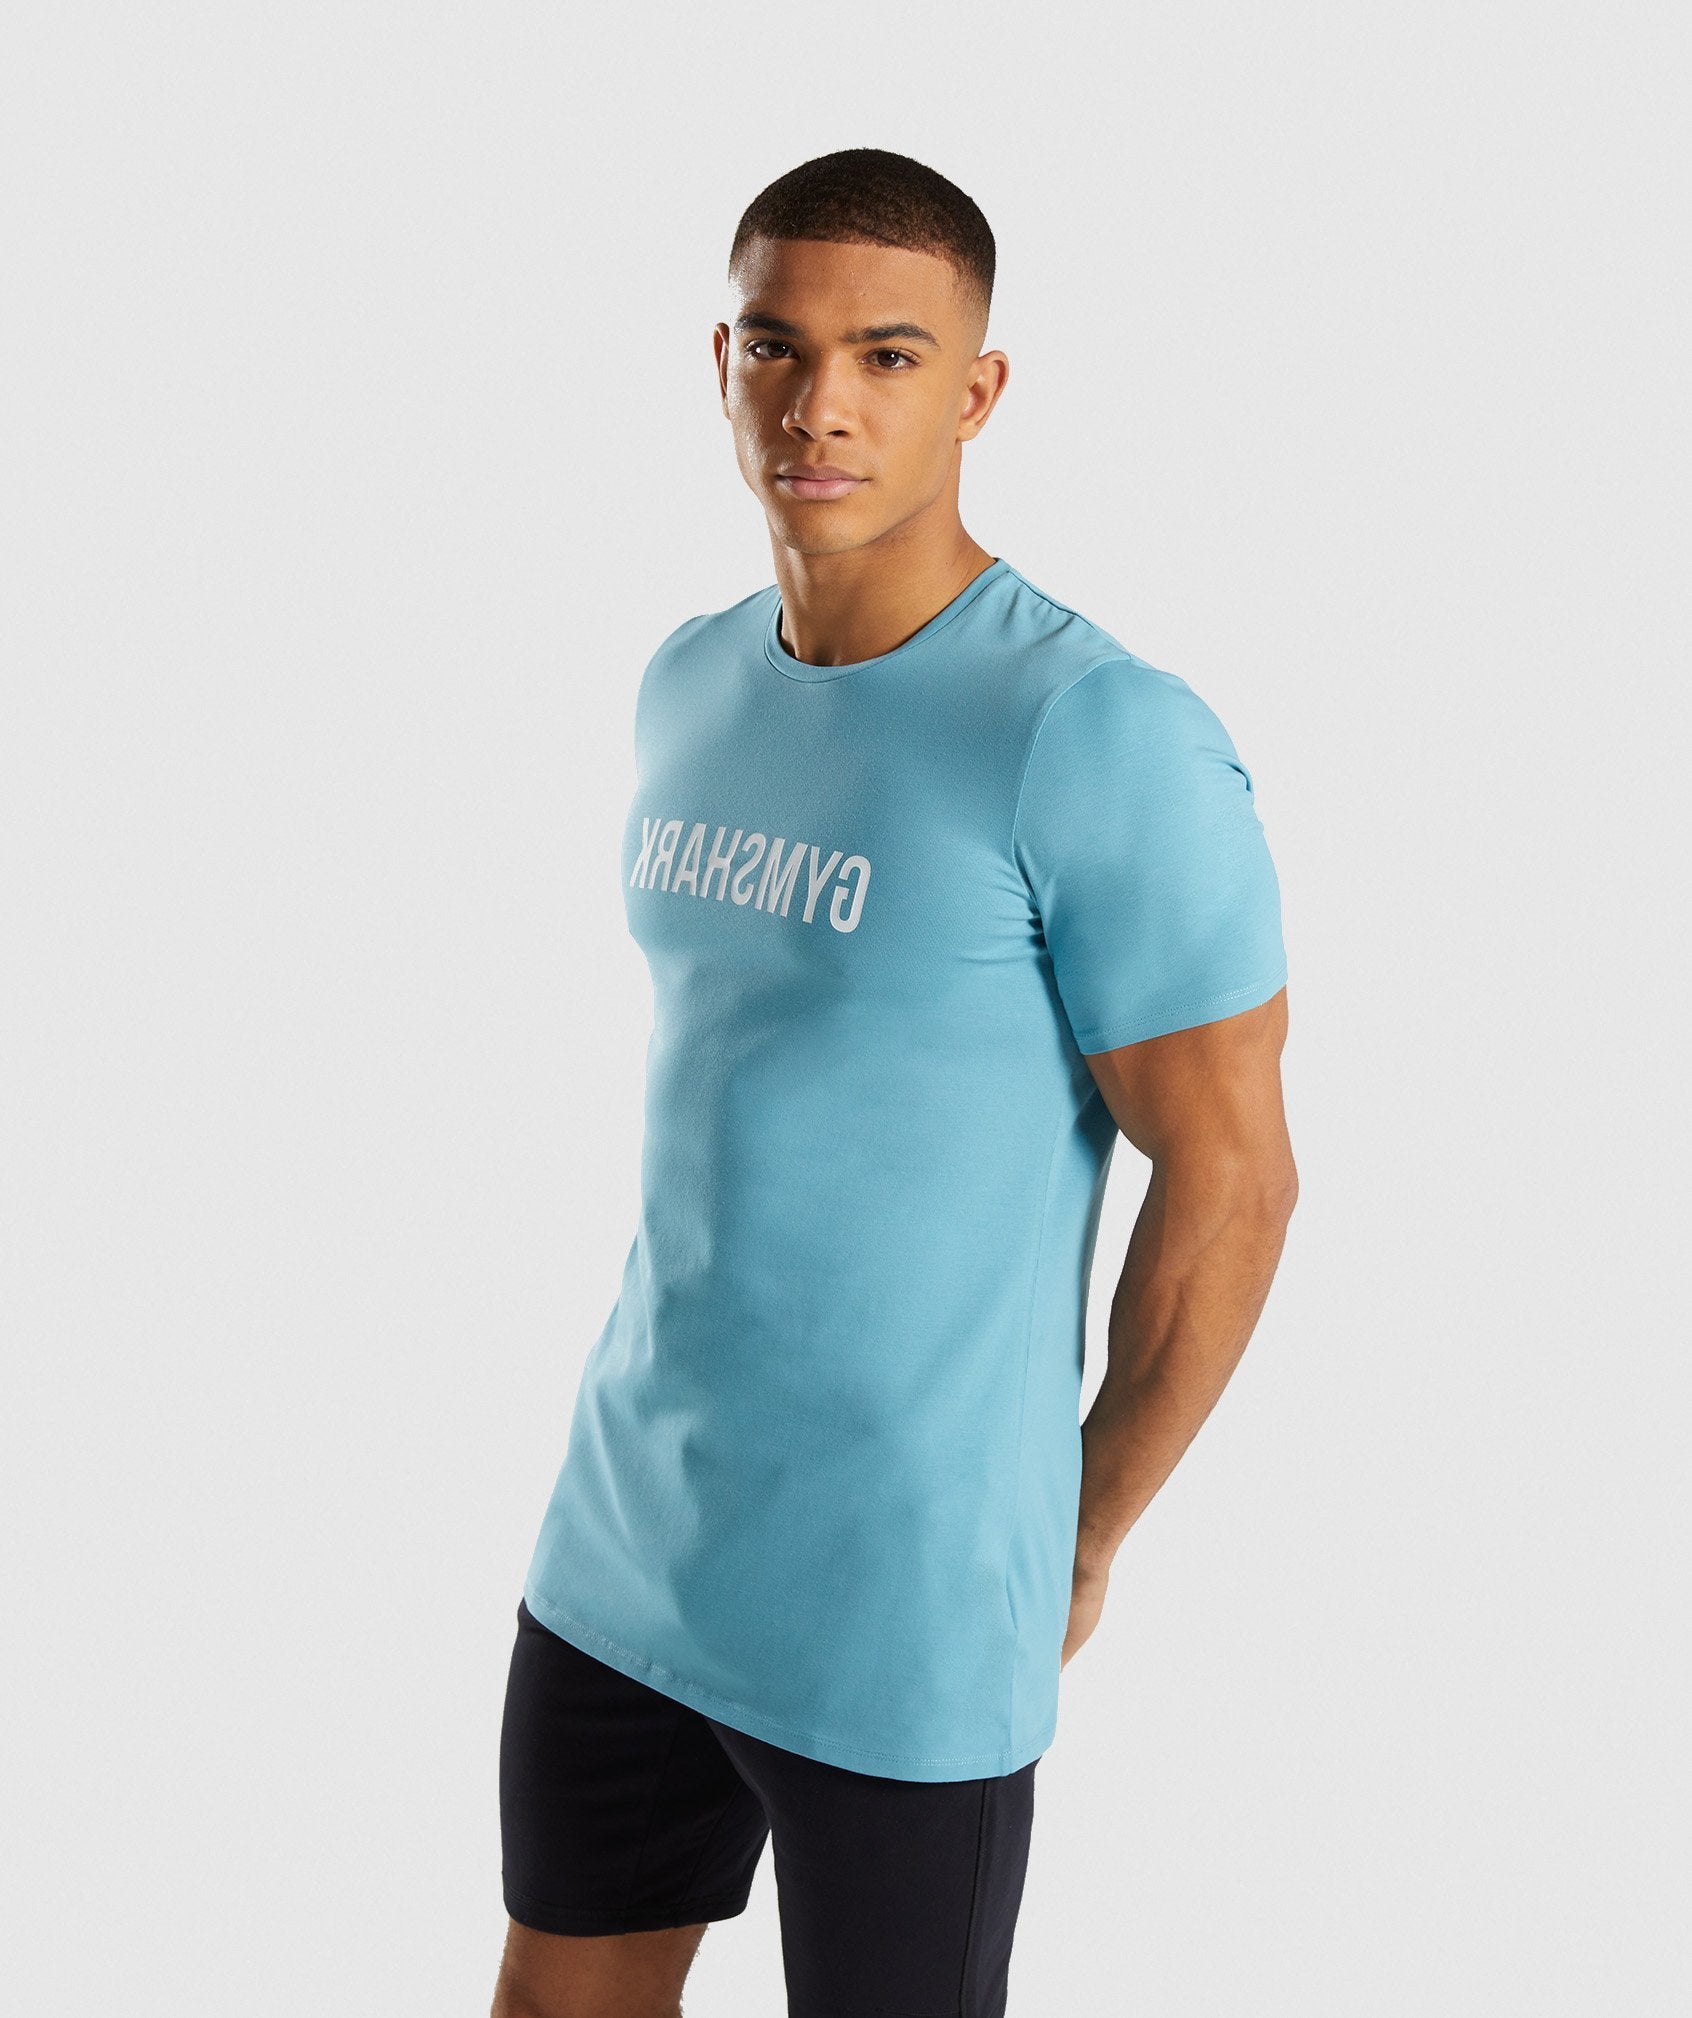 Reverse T-Shirt in Dusky Teal - view 3